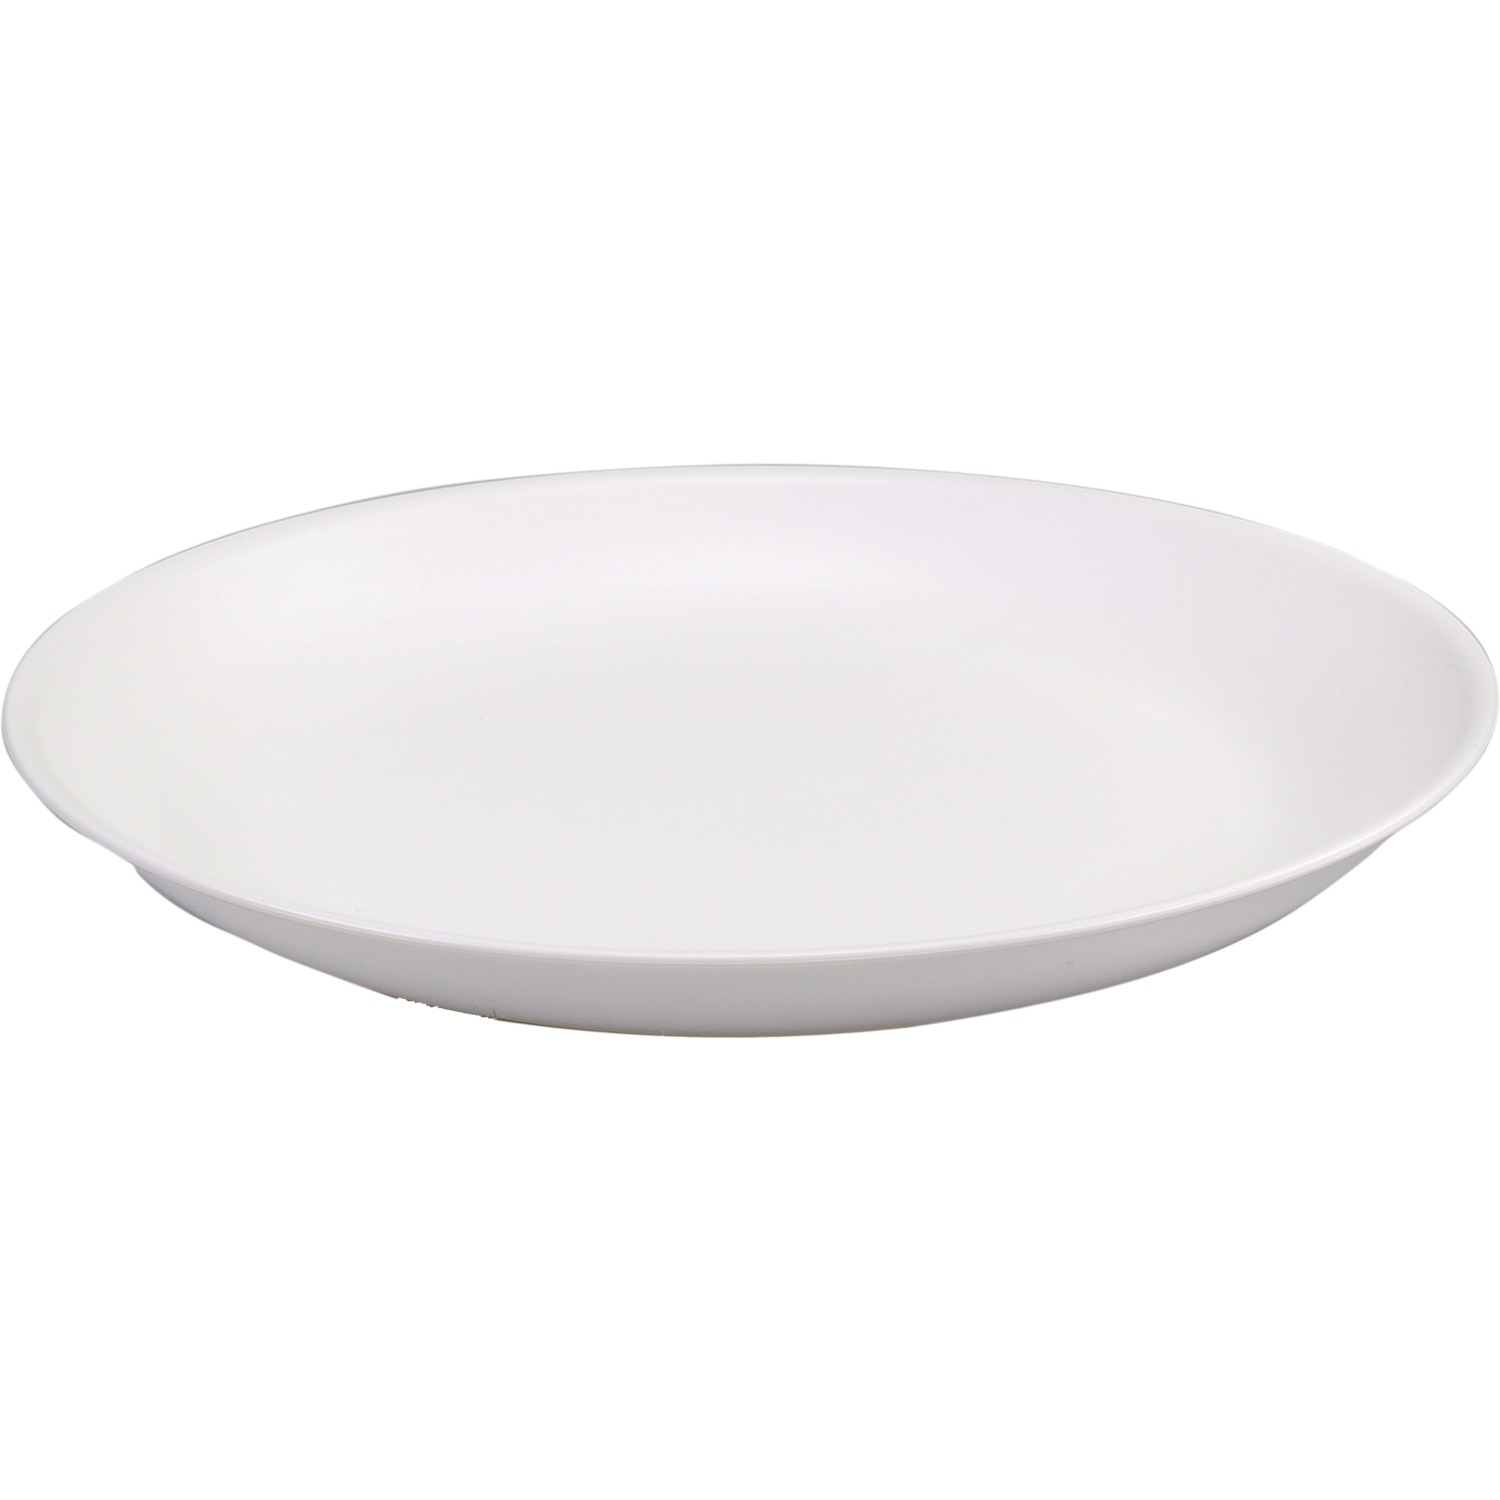 Goldplast Plate, Mineral, reusable, unbreakable, round, 1 compartment, pP, Ø21cm, white 1